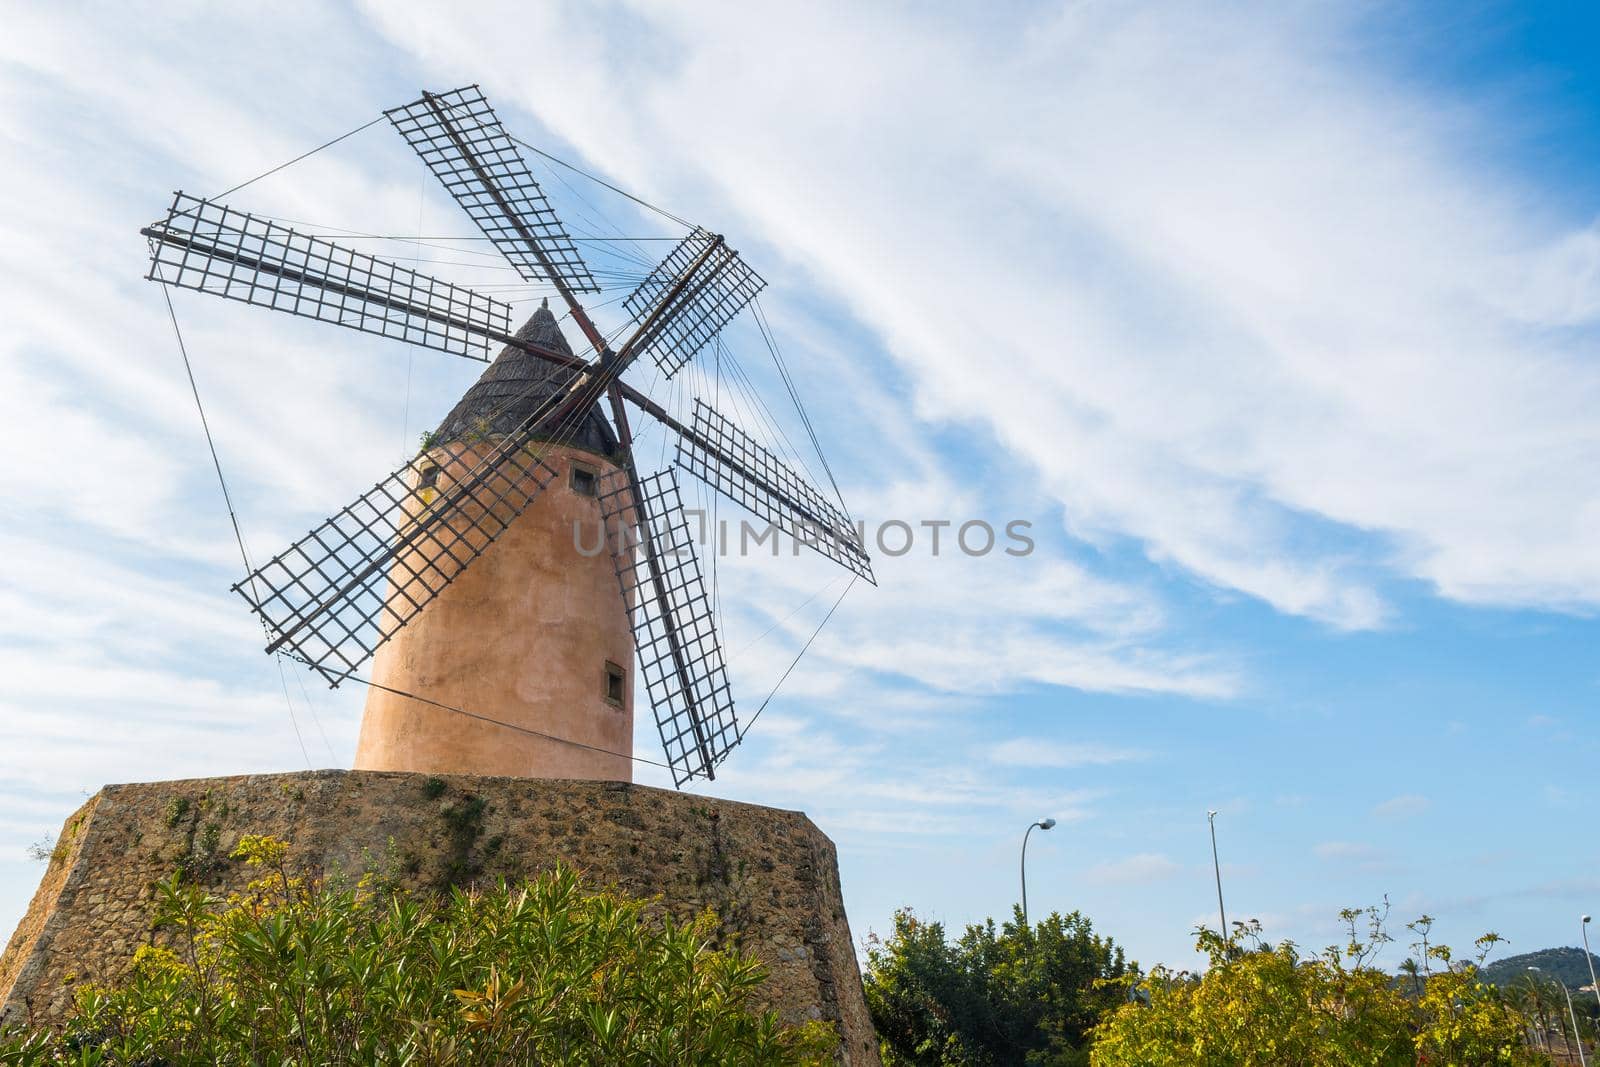 Typical wind mill, Majorca